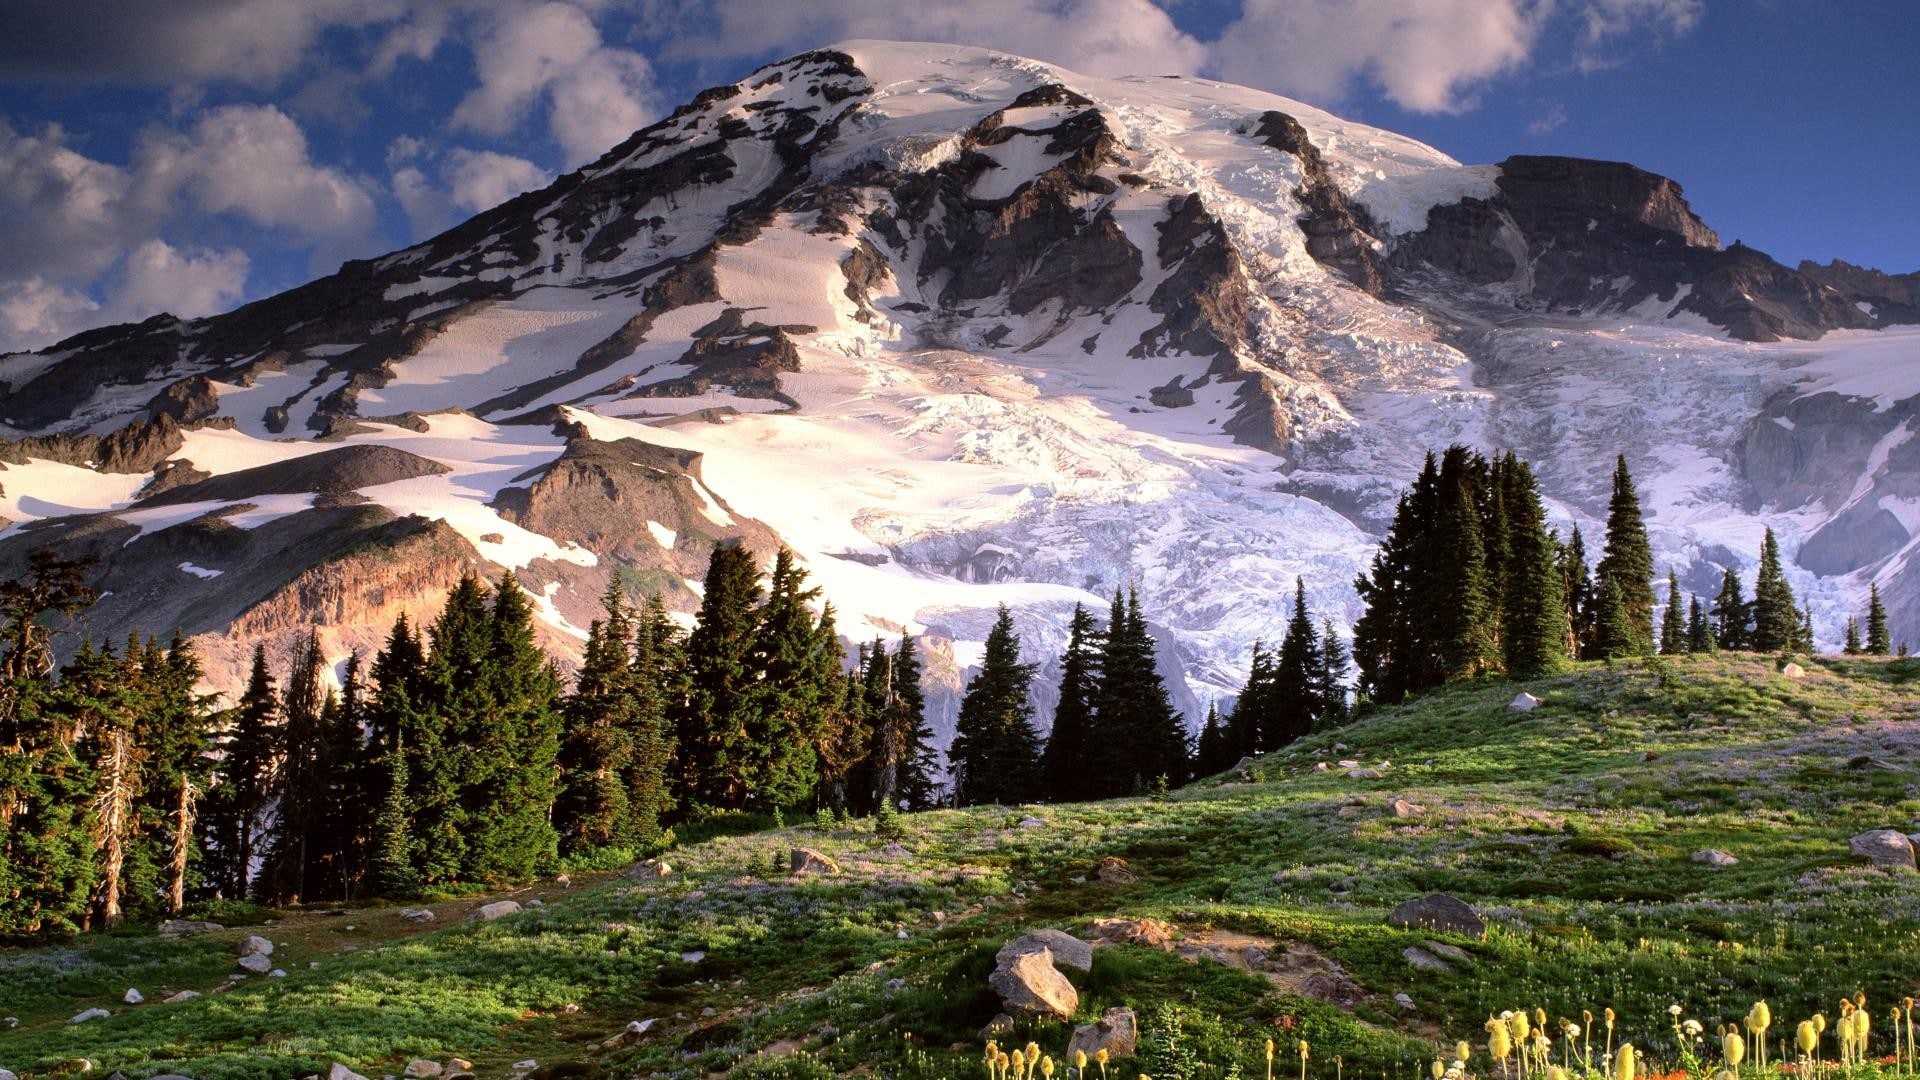 Nature, Landscape, Mount Rushmore, Mountain, Trees, snow capped mountains and pine trees